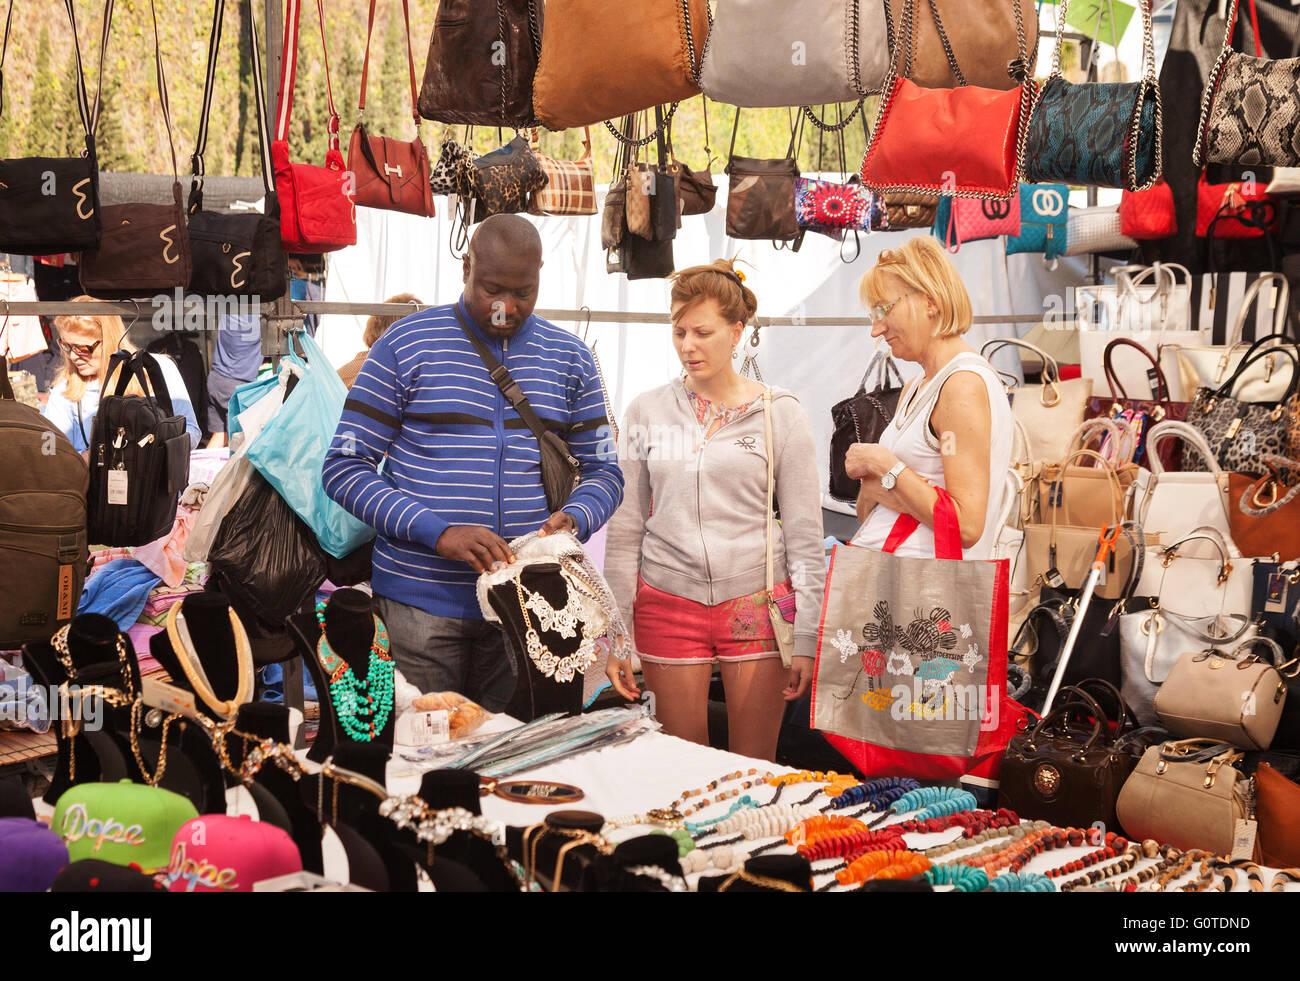 Woman buying a handbag from a market stall, Marbella outdoor market, Marbella, Andalusia Spain Europe Stock Photo